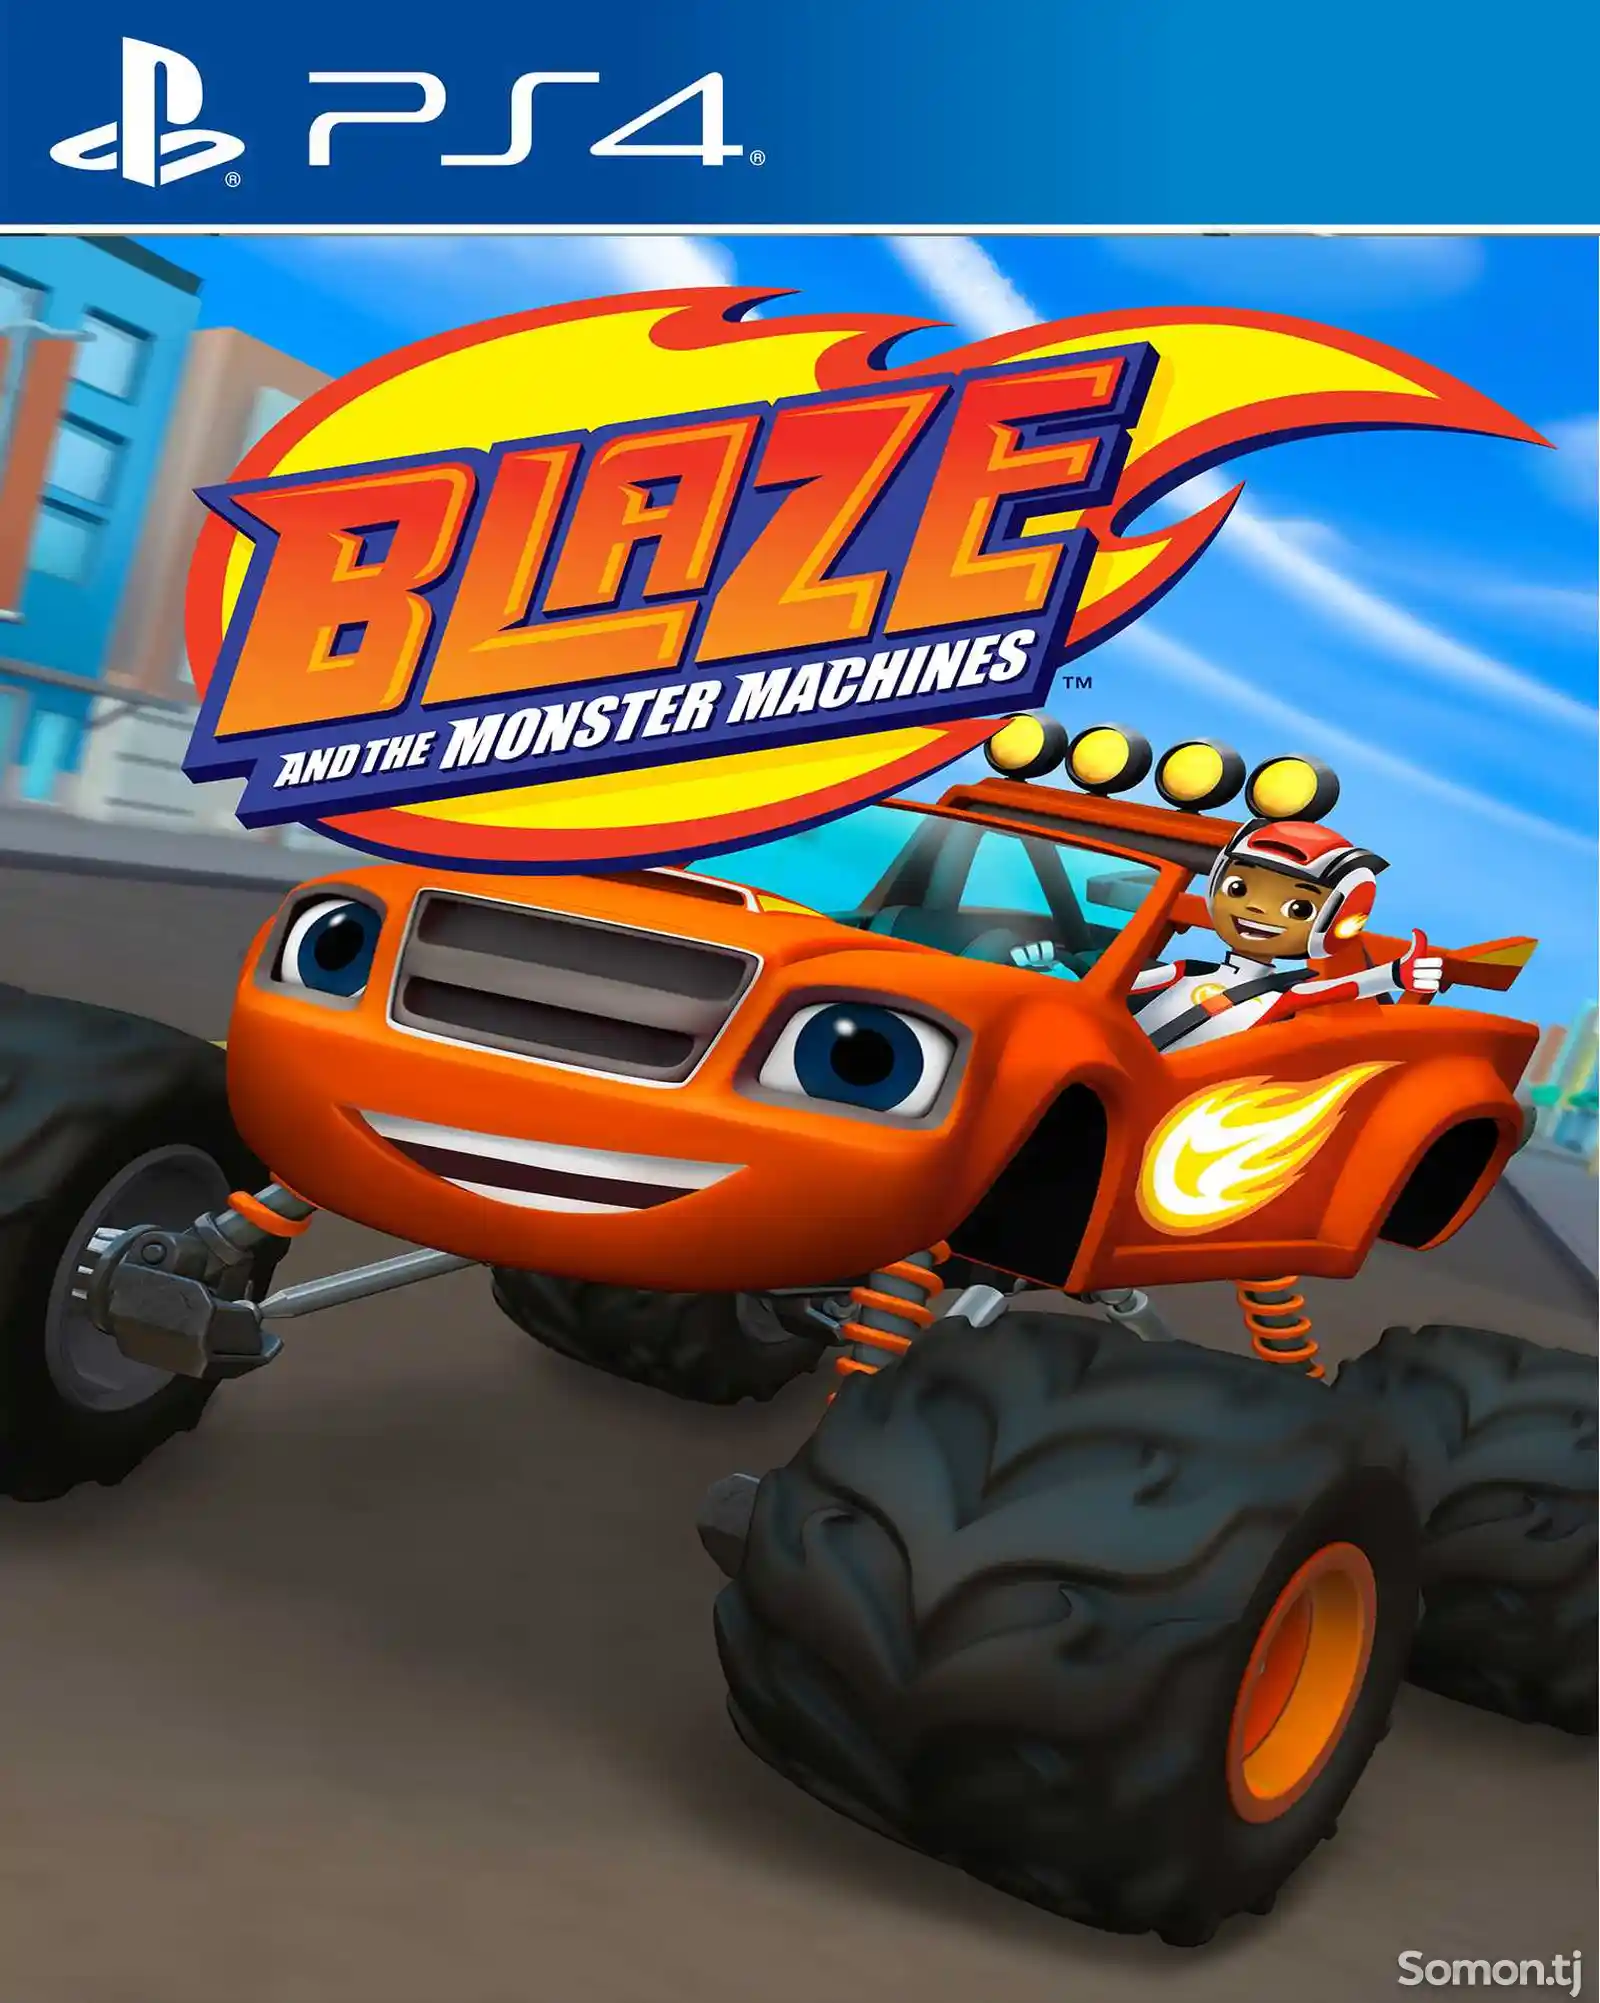 Игра Blaza and the monster machines для PS-4 / 5.05 / 6.72 / 7.02 / 7.55 / 9.00-1